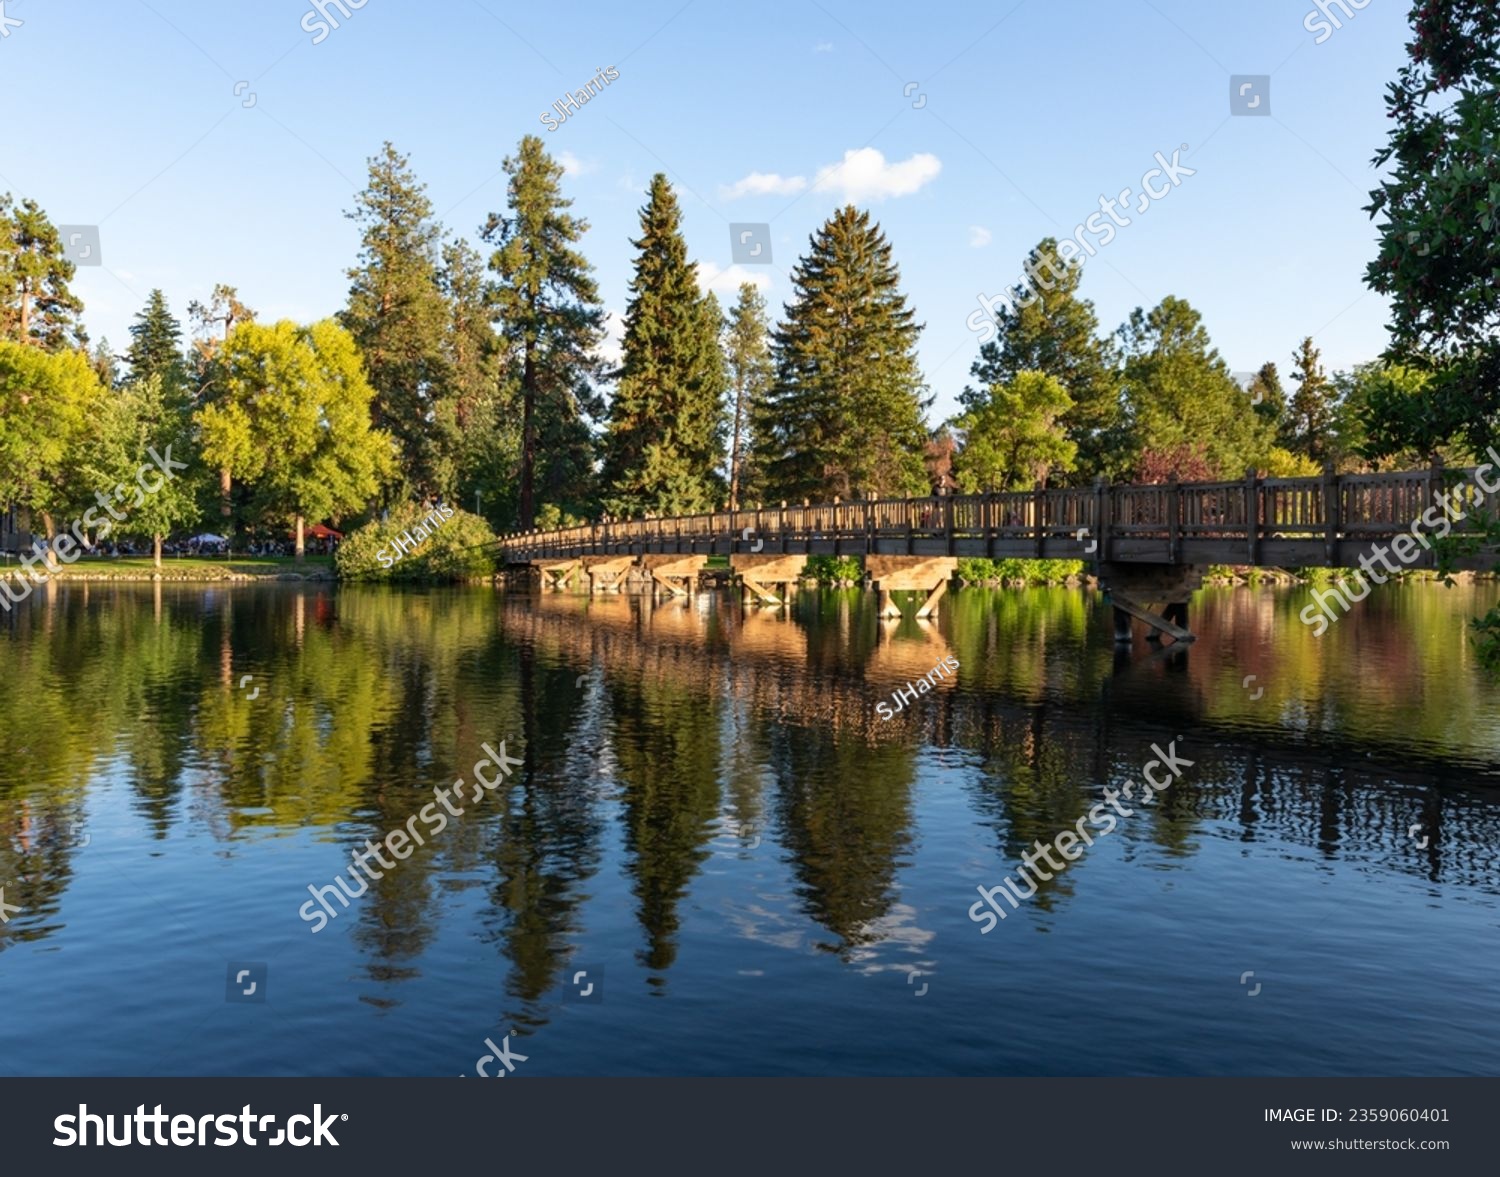 Beautiful and tranquil lush wide angle view of bridge over Mirror Pond in Drake Park, Bend, Oregon, on a blue sky sunny summer afternoon. #2359060401